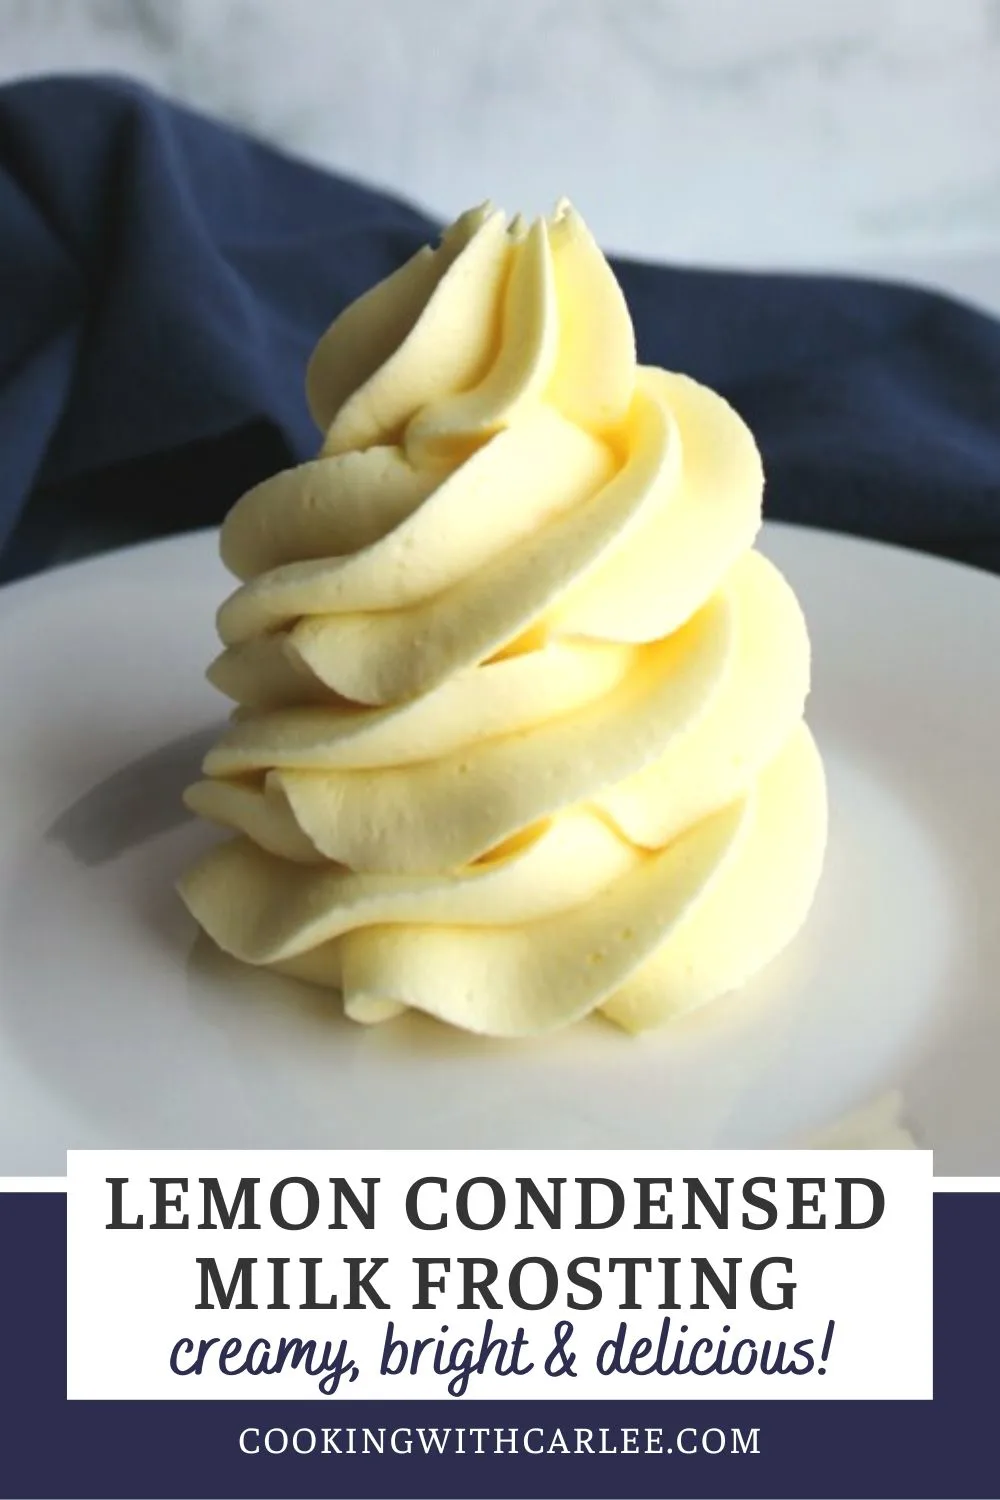 This frosting is the perfect combination of rich, fluffy and bright. It has a lovely lemon flavor without being too much and the sweetened condensed milk adds that little something special you can't quite put your finger on!